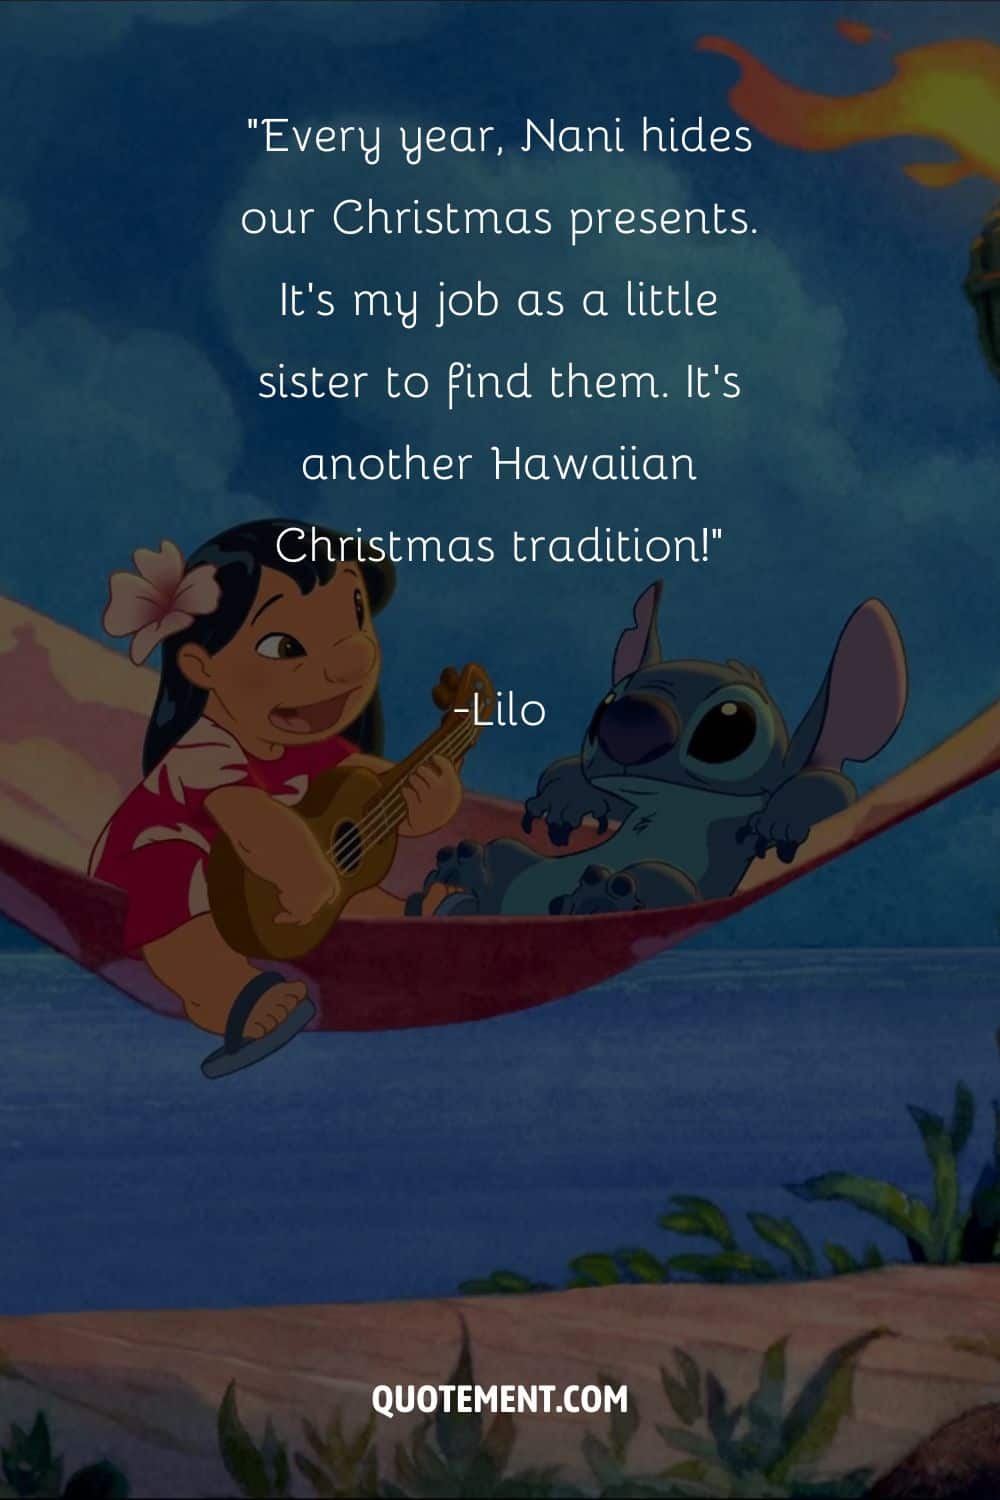 Lilo playing guitar and Stitch laying in a hammock